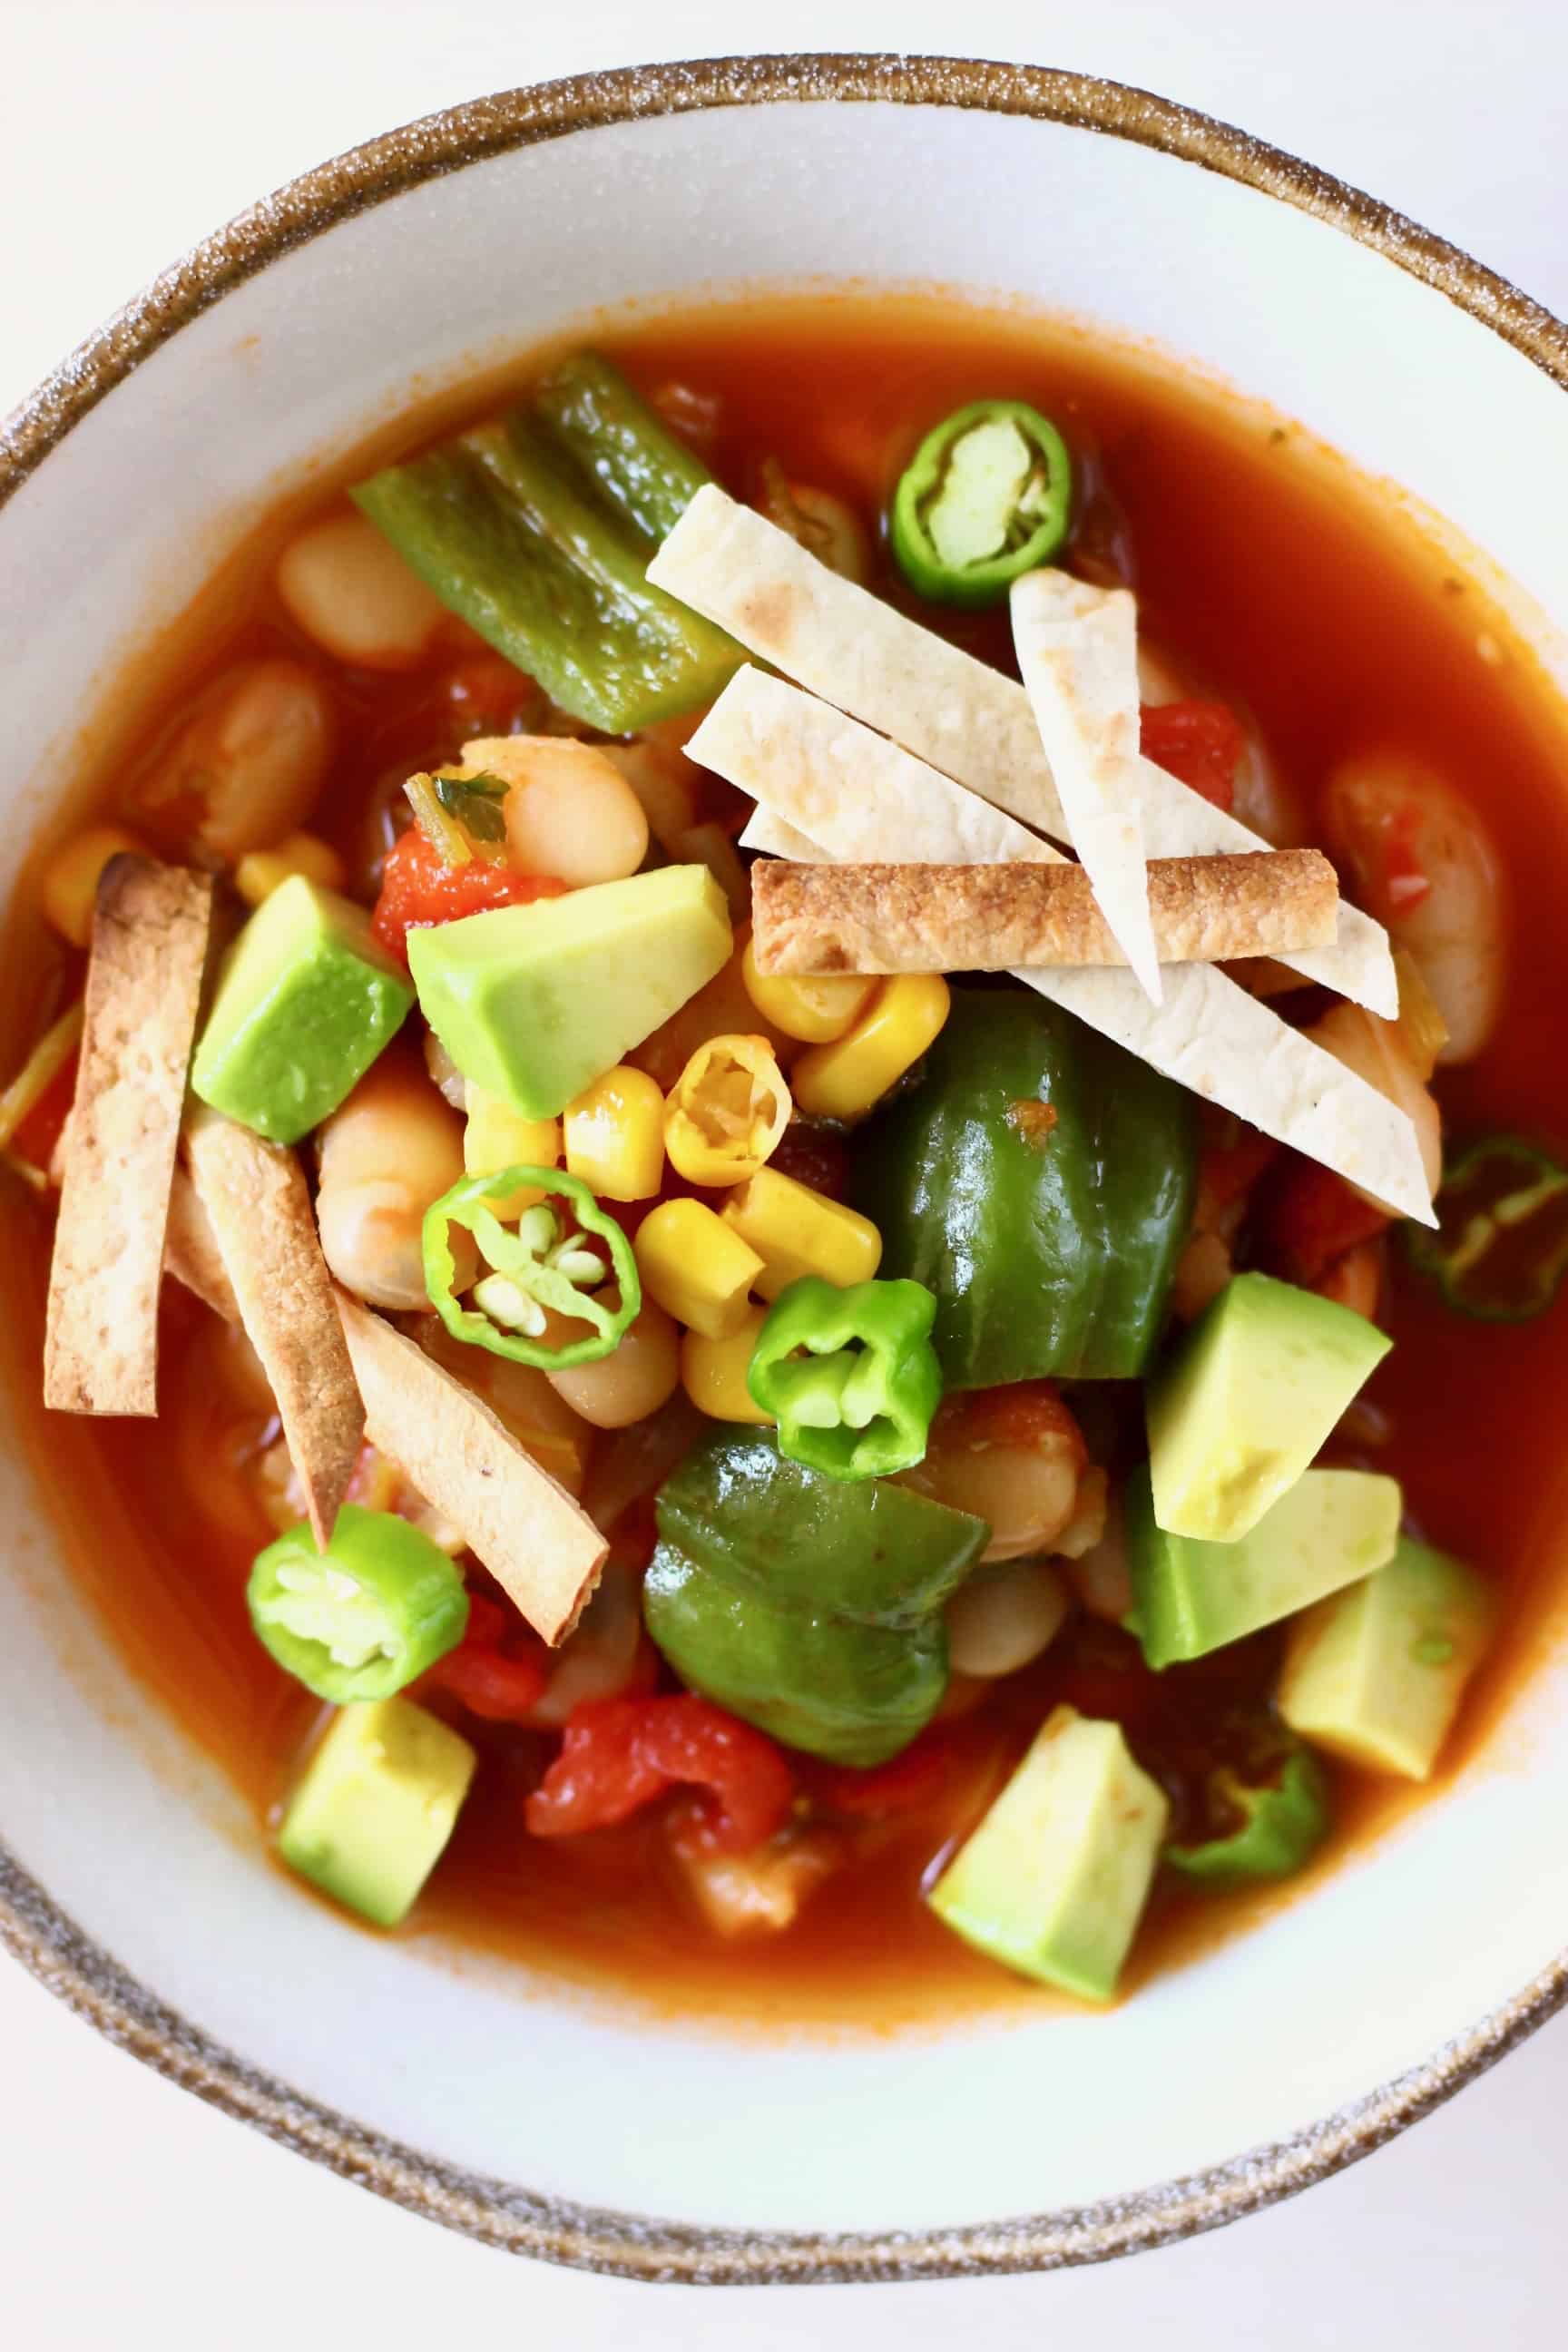 Tomato soup with white beans, sweetcorn and green peppers topped with tortilla strips and diced avocado in a white bowl against a white background